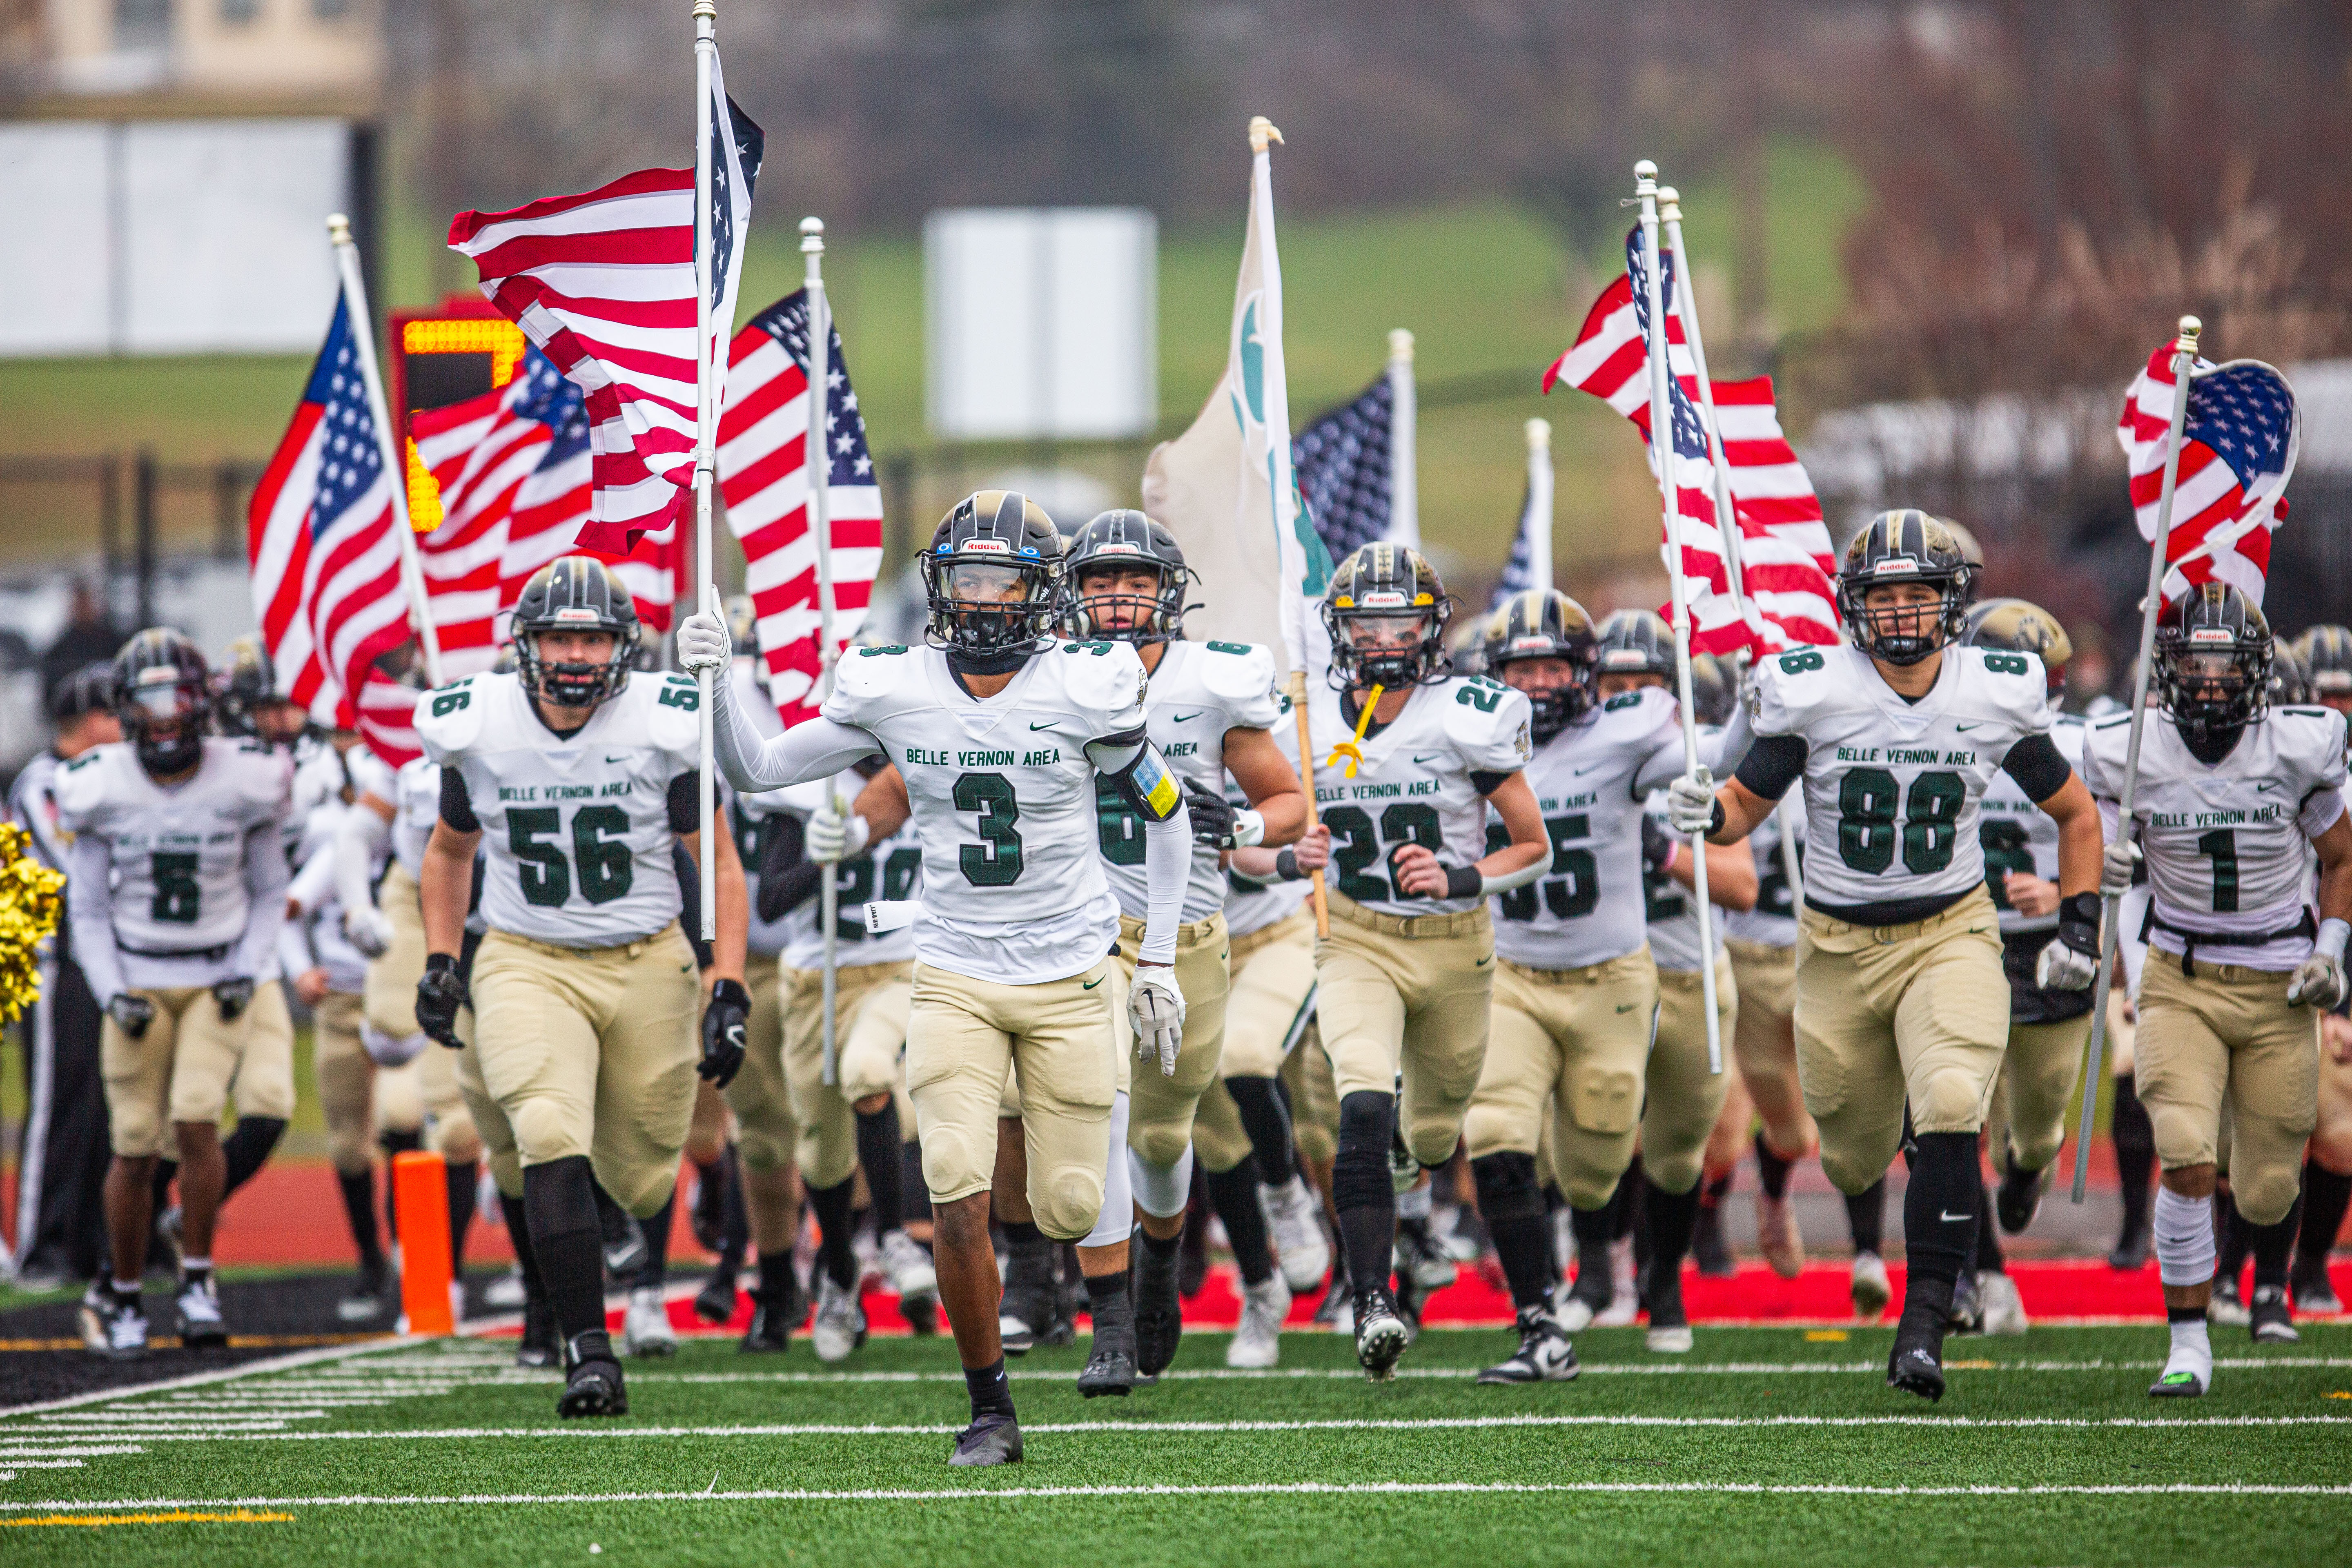 Watch: Highlights of Belle Vernon's win over Northwestern Lehigh in PIAA 3A  Championship 